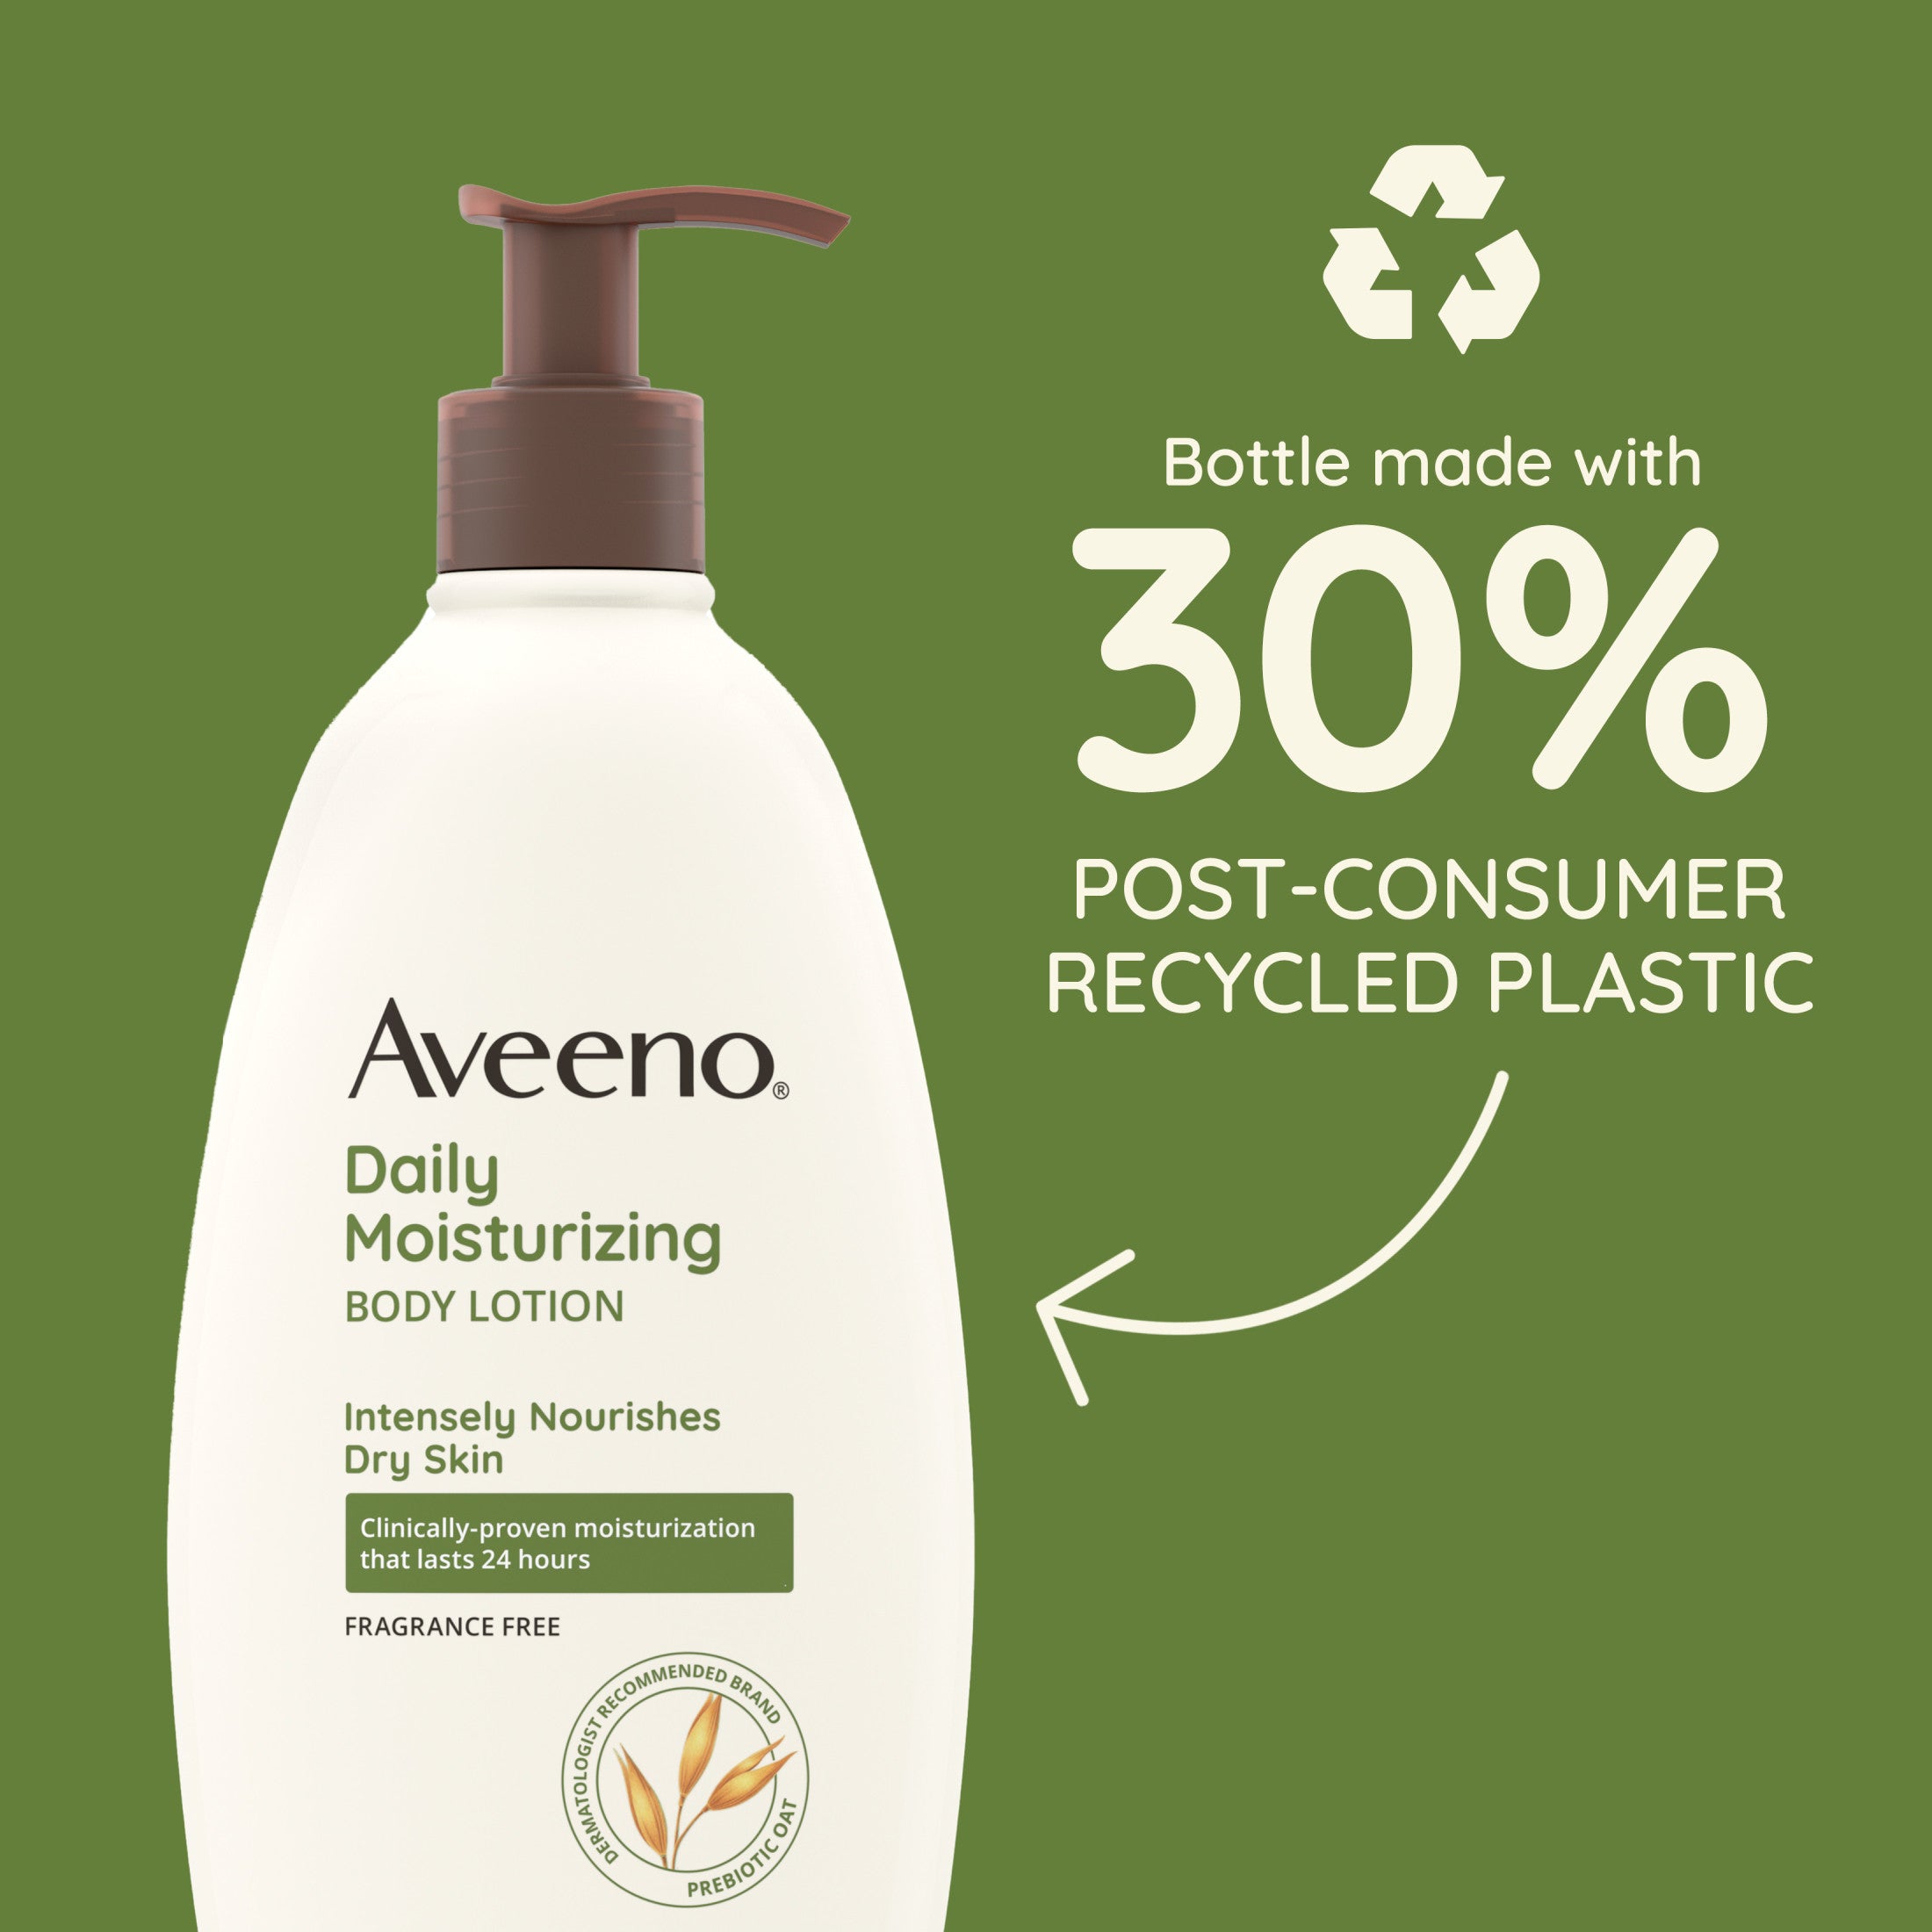 Aveeno Daily Moisturizing Body Lotion and Facial Moisturizer for Face, Body and Dry Skin, 18 oz | MTTS339